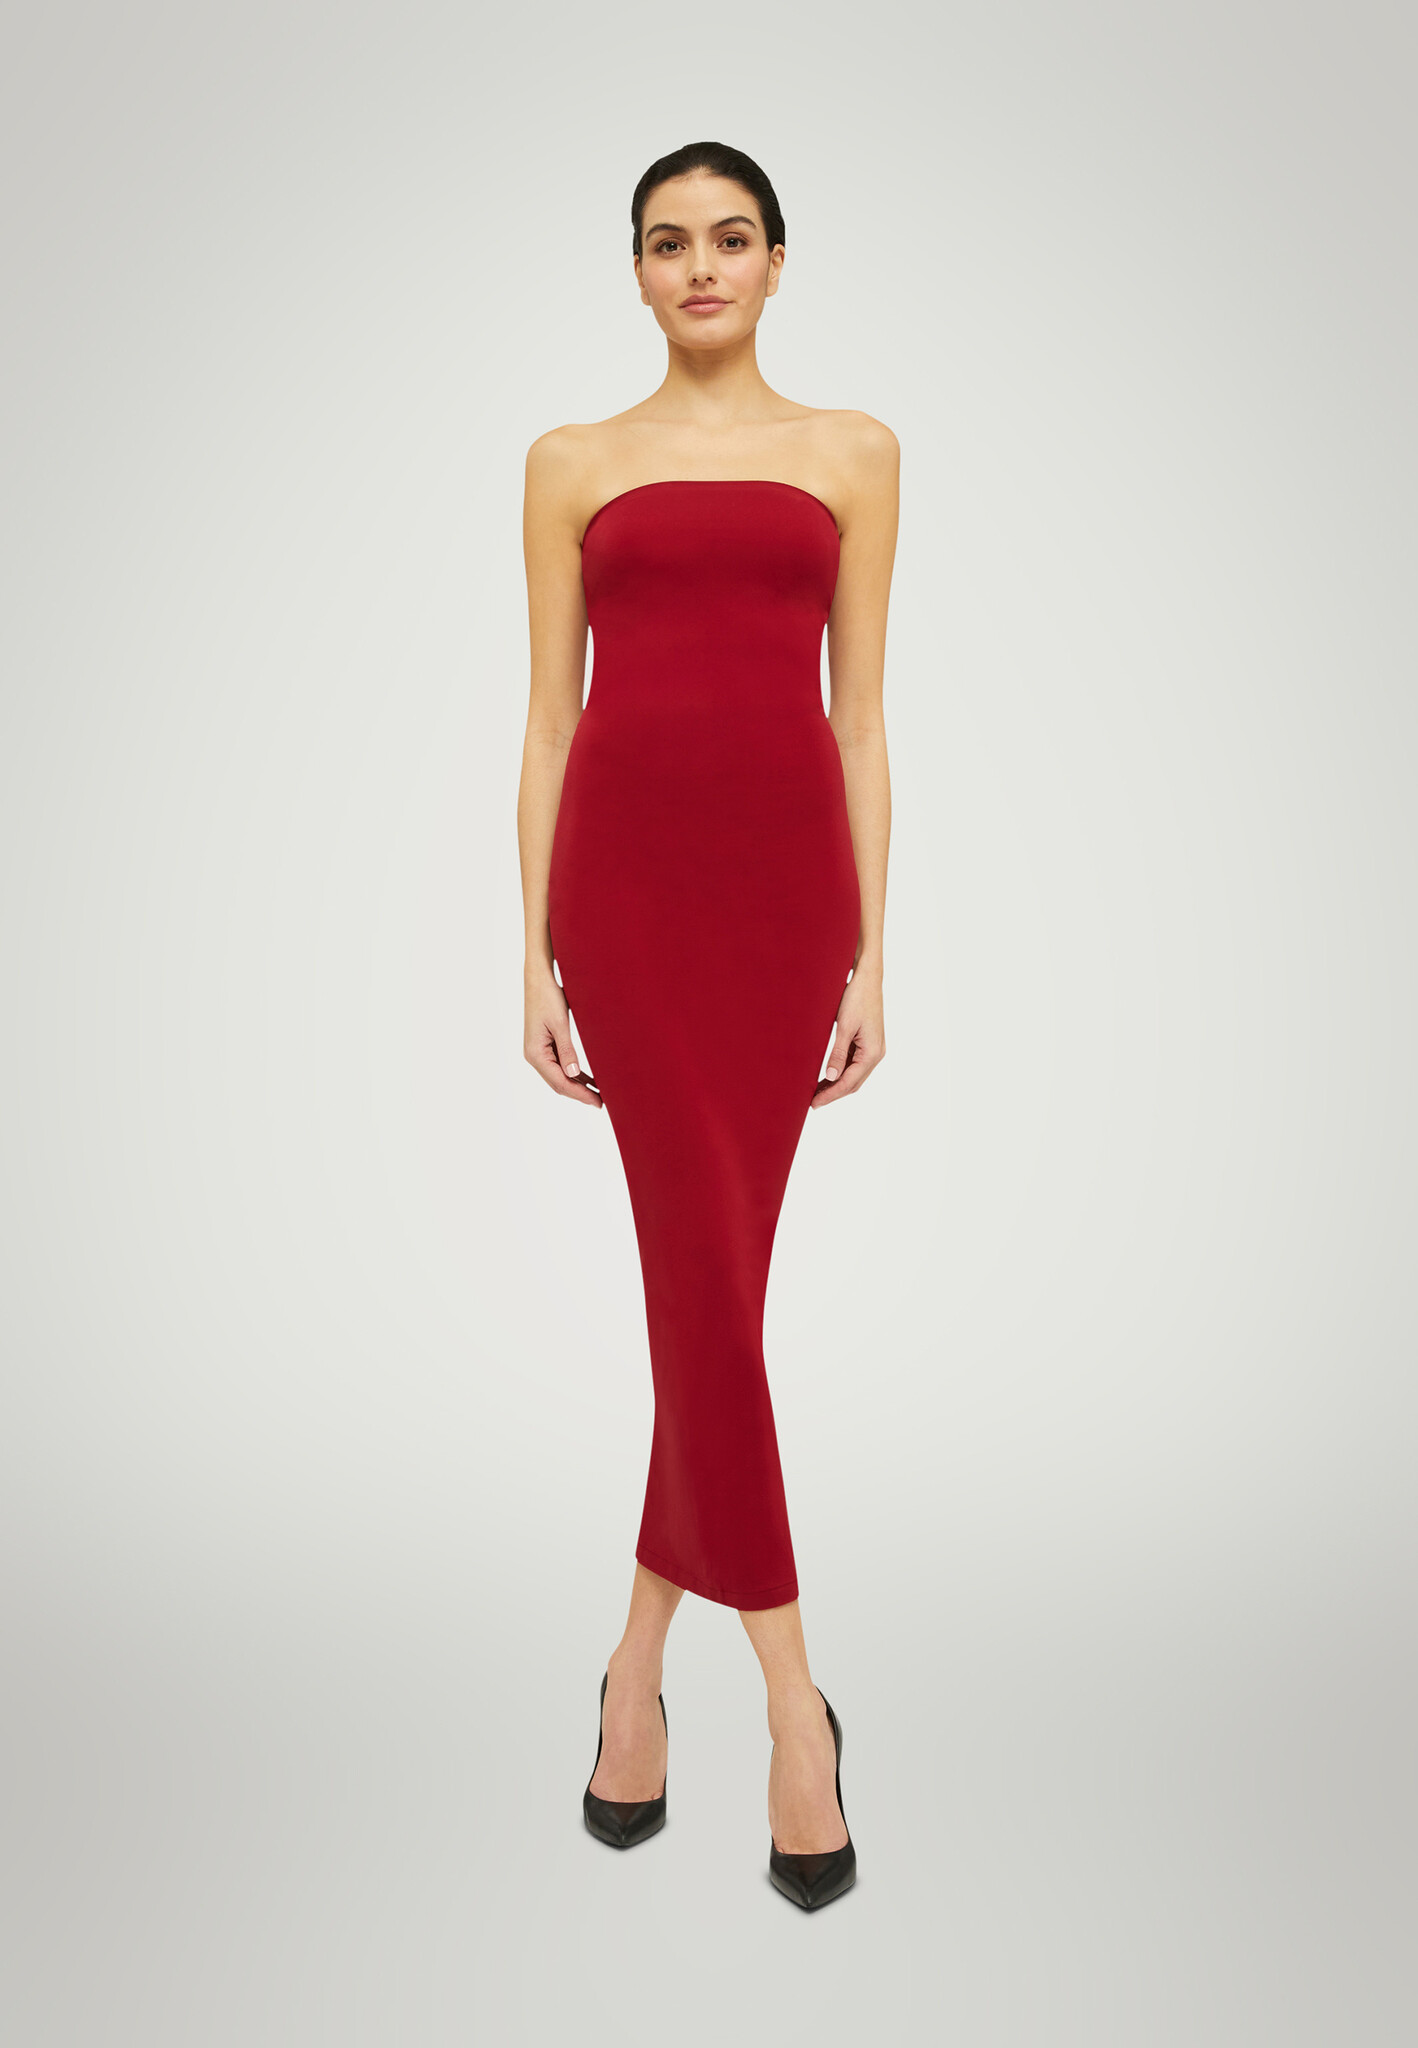 Wolford x REVOLVE Fatal Dress in Jelly Bean